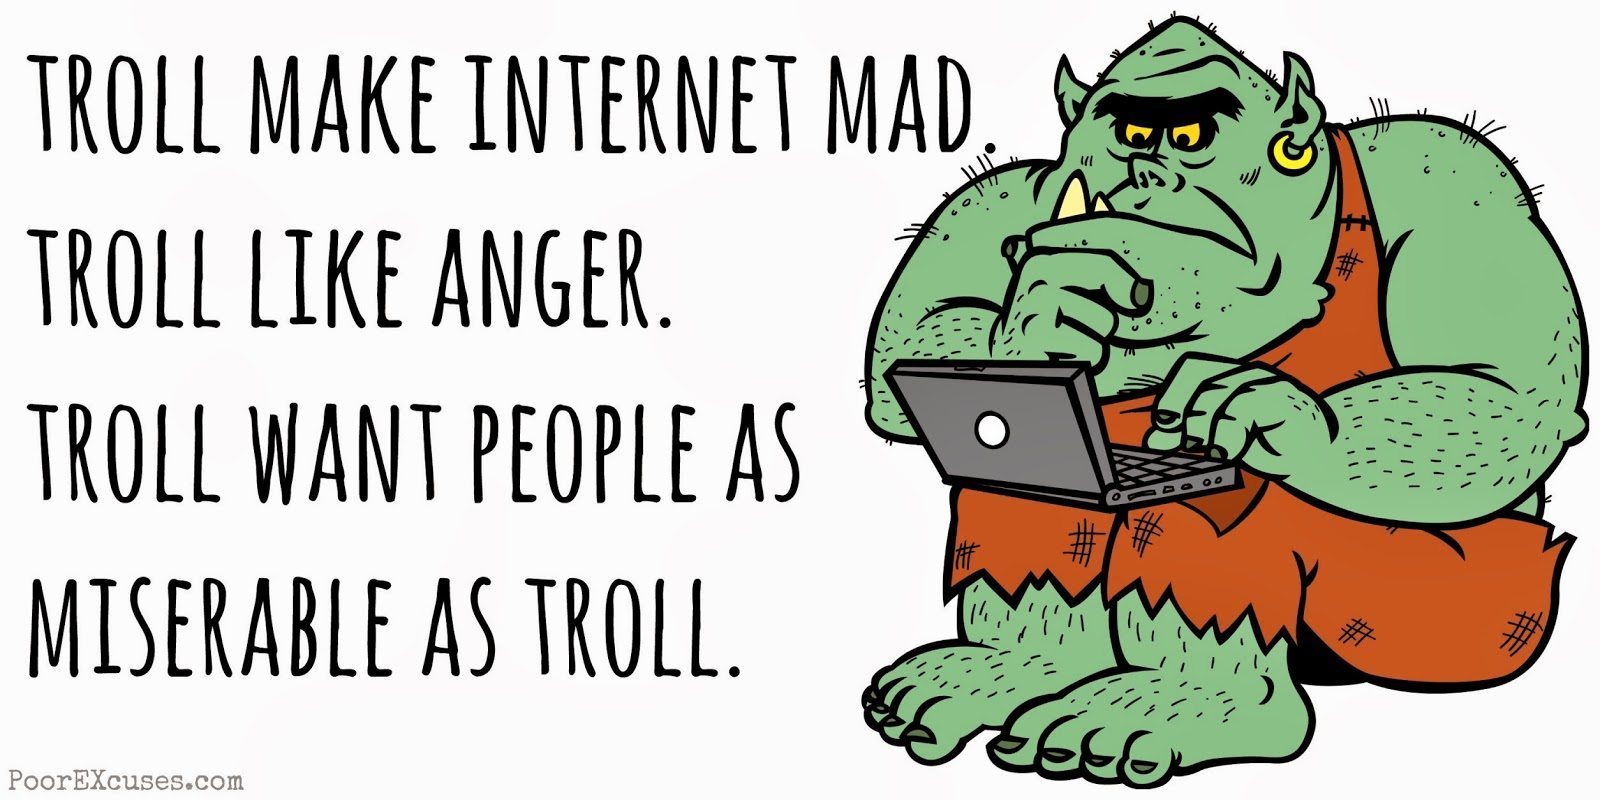 Online trolling used to be funny, but now the term refers to